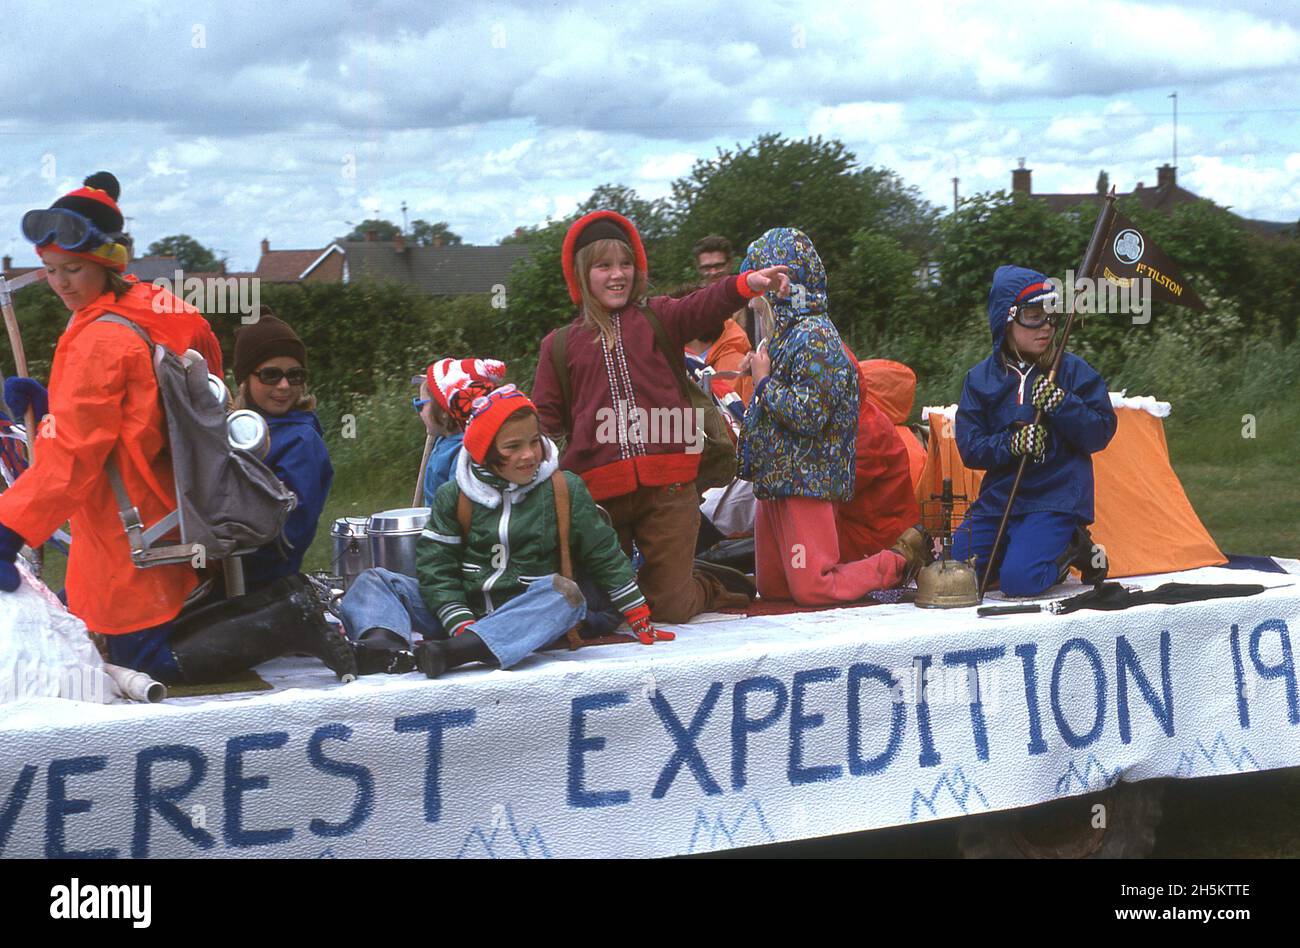 1977, historical, celebrating the Queen's Silver Jubliee, girls in anoraks and camping gear from the 1st Tilston girl guides sitting on a decorated trailer or float, named after the Everest Expedition of the same year, Tilston, Cheshire, England, UK. Stock Photo